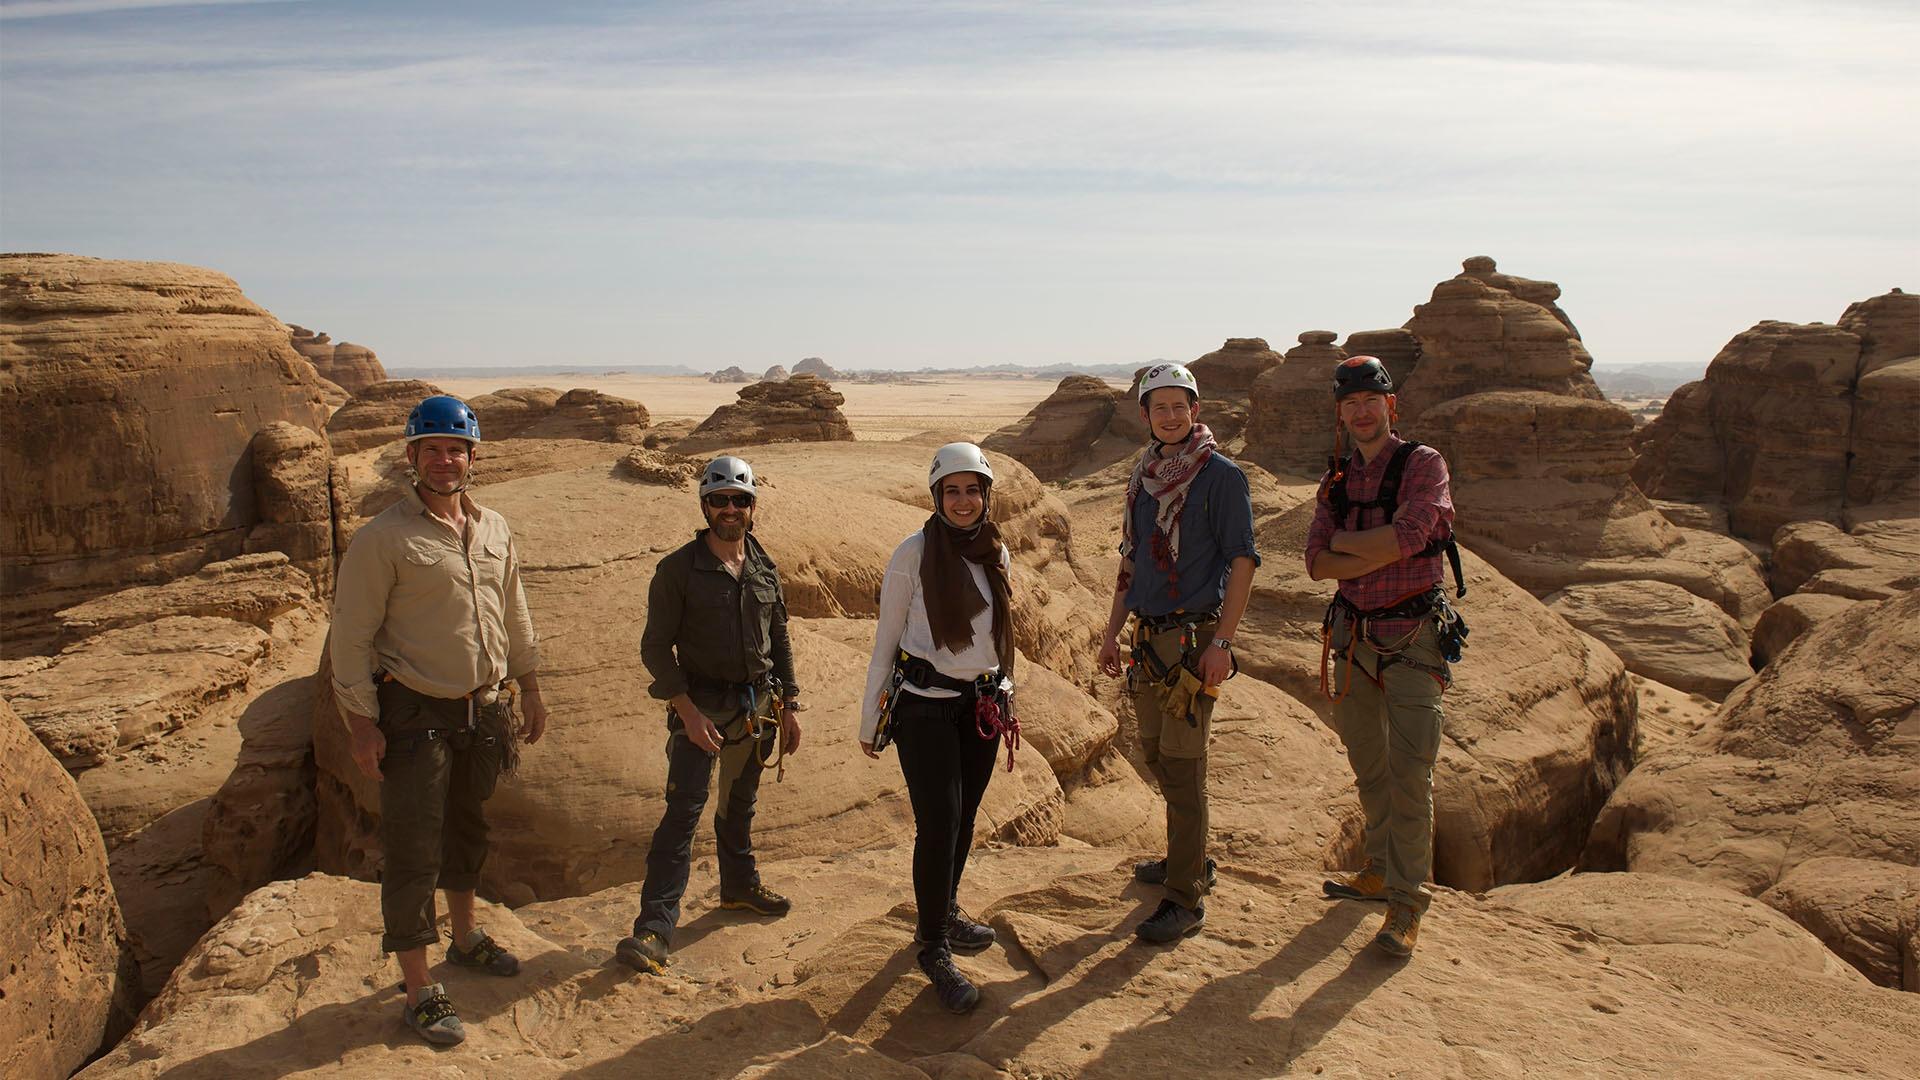 Steve Backshall and his team explore the archaeological site of Hegra.